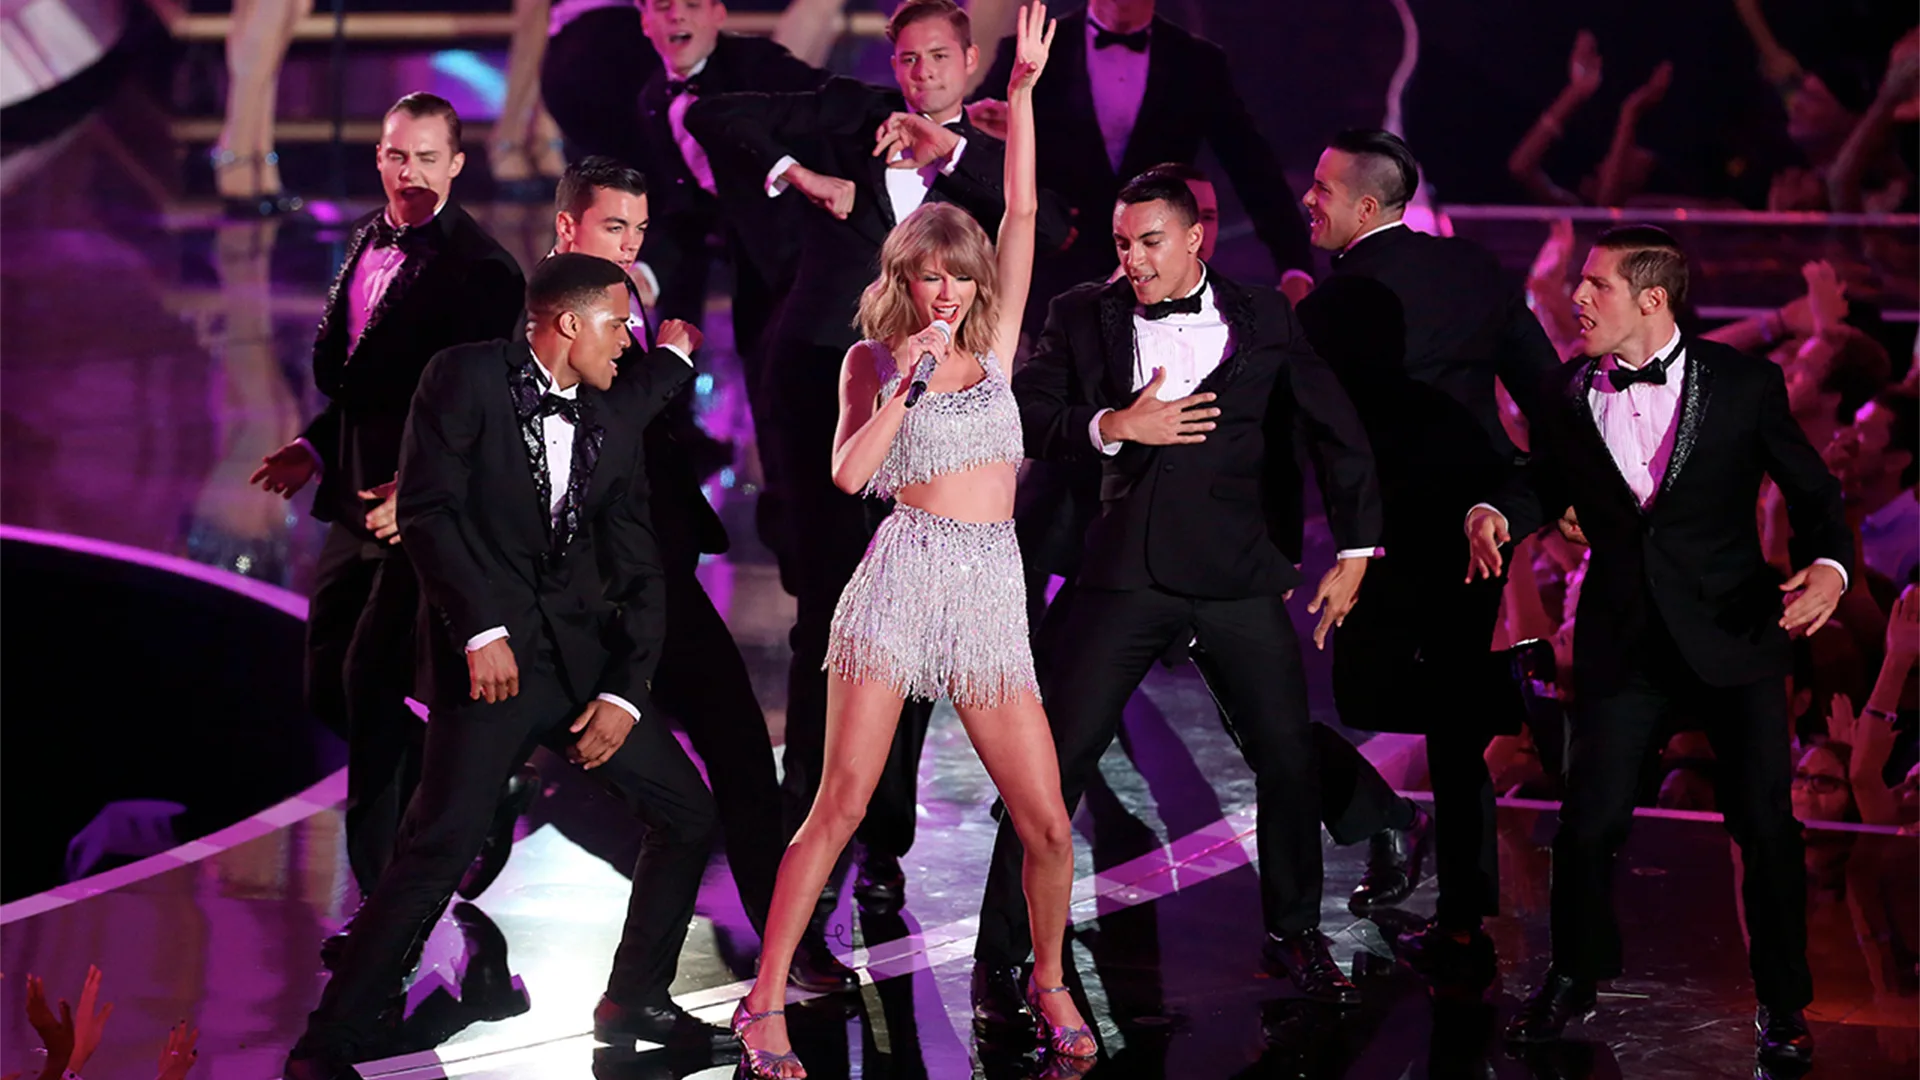 Tayor Swift performing on stage in silver glittery dress, holding silver glittery matched microphone, surrounded by male dancers dressed in black tuxedos.